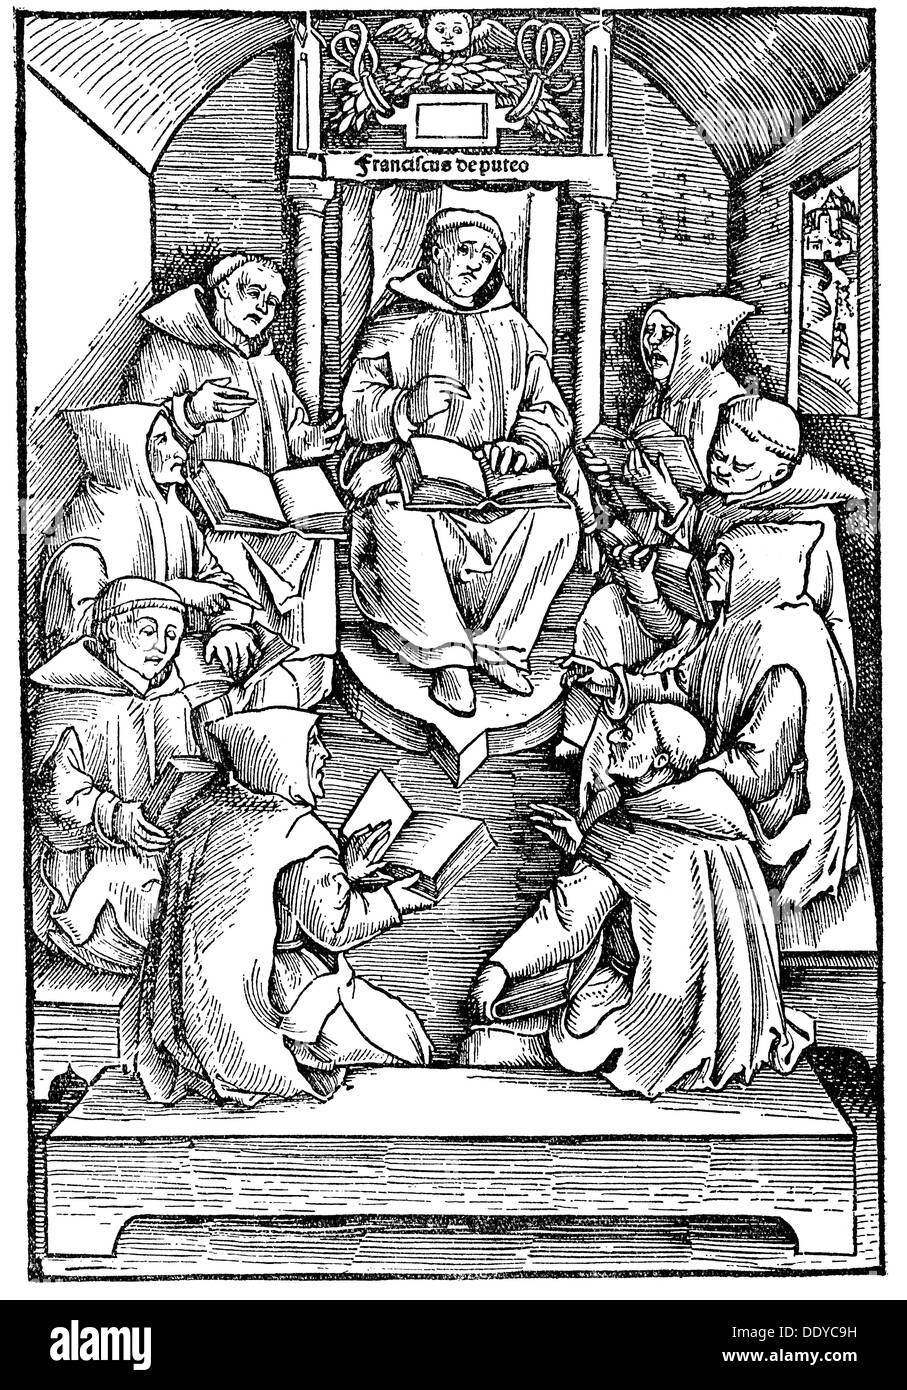 St. Francis of Assisi, circa 1181 - 3.10.1226, Italian clergyman, Saint, during dispute, woodcut of Urs Graf the Elder, Switzerland, early 16th century, Stock Photo